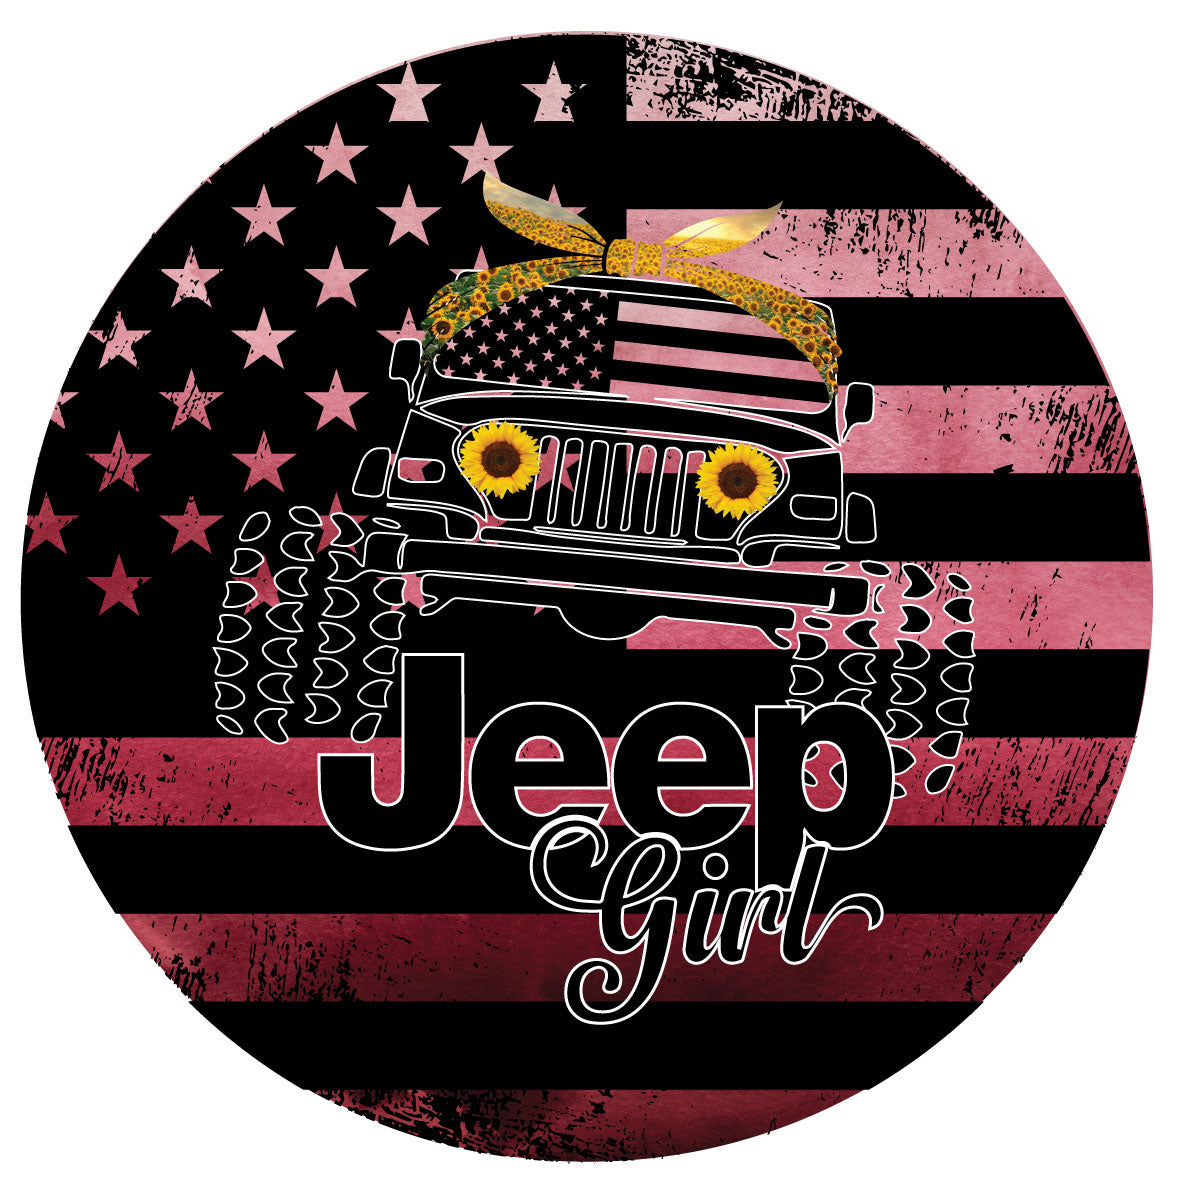 Spare tire cover design for a Jeep Wrangler of a Pink ombre rustic American flag background, Jeep Wrangler silhouette with an American flag windshield, wearing a sunflower headband and sunflower headlights and the words Jeep Girl across the bottom.